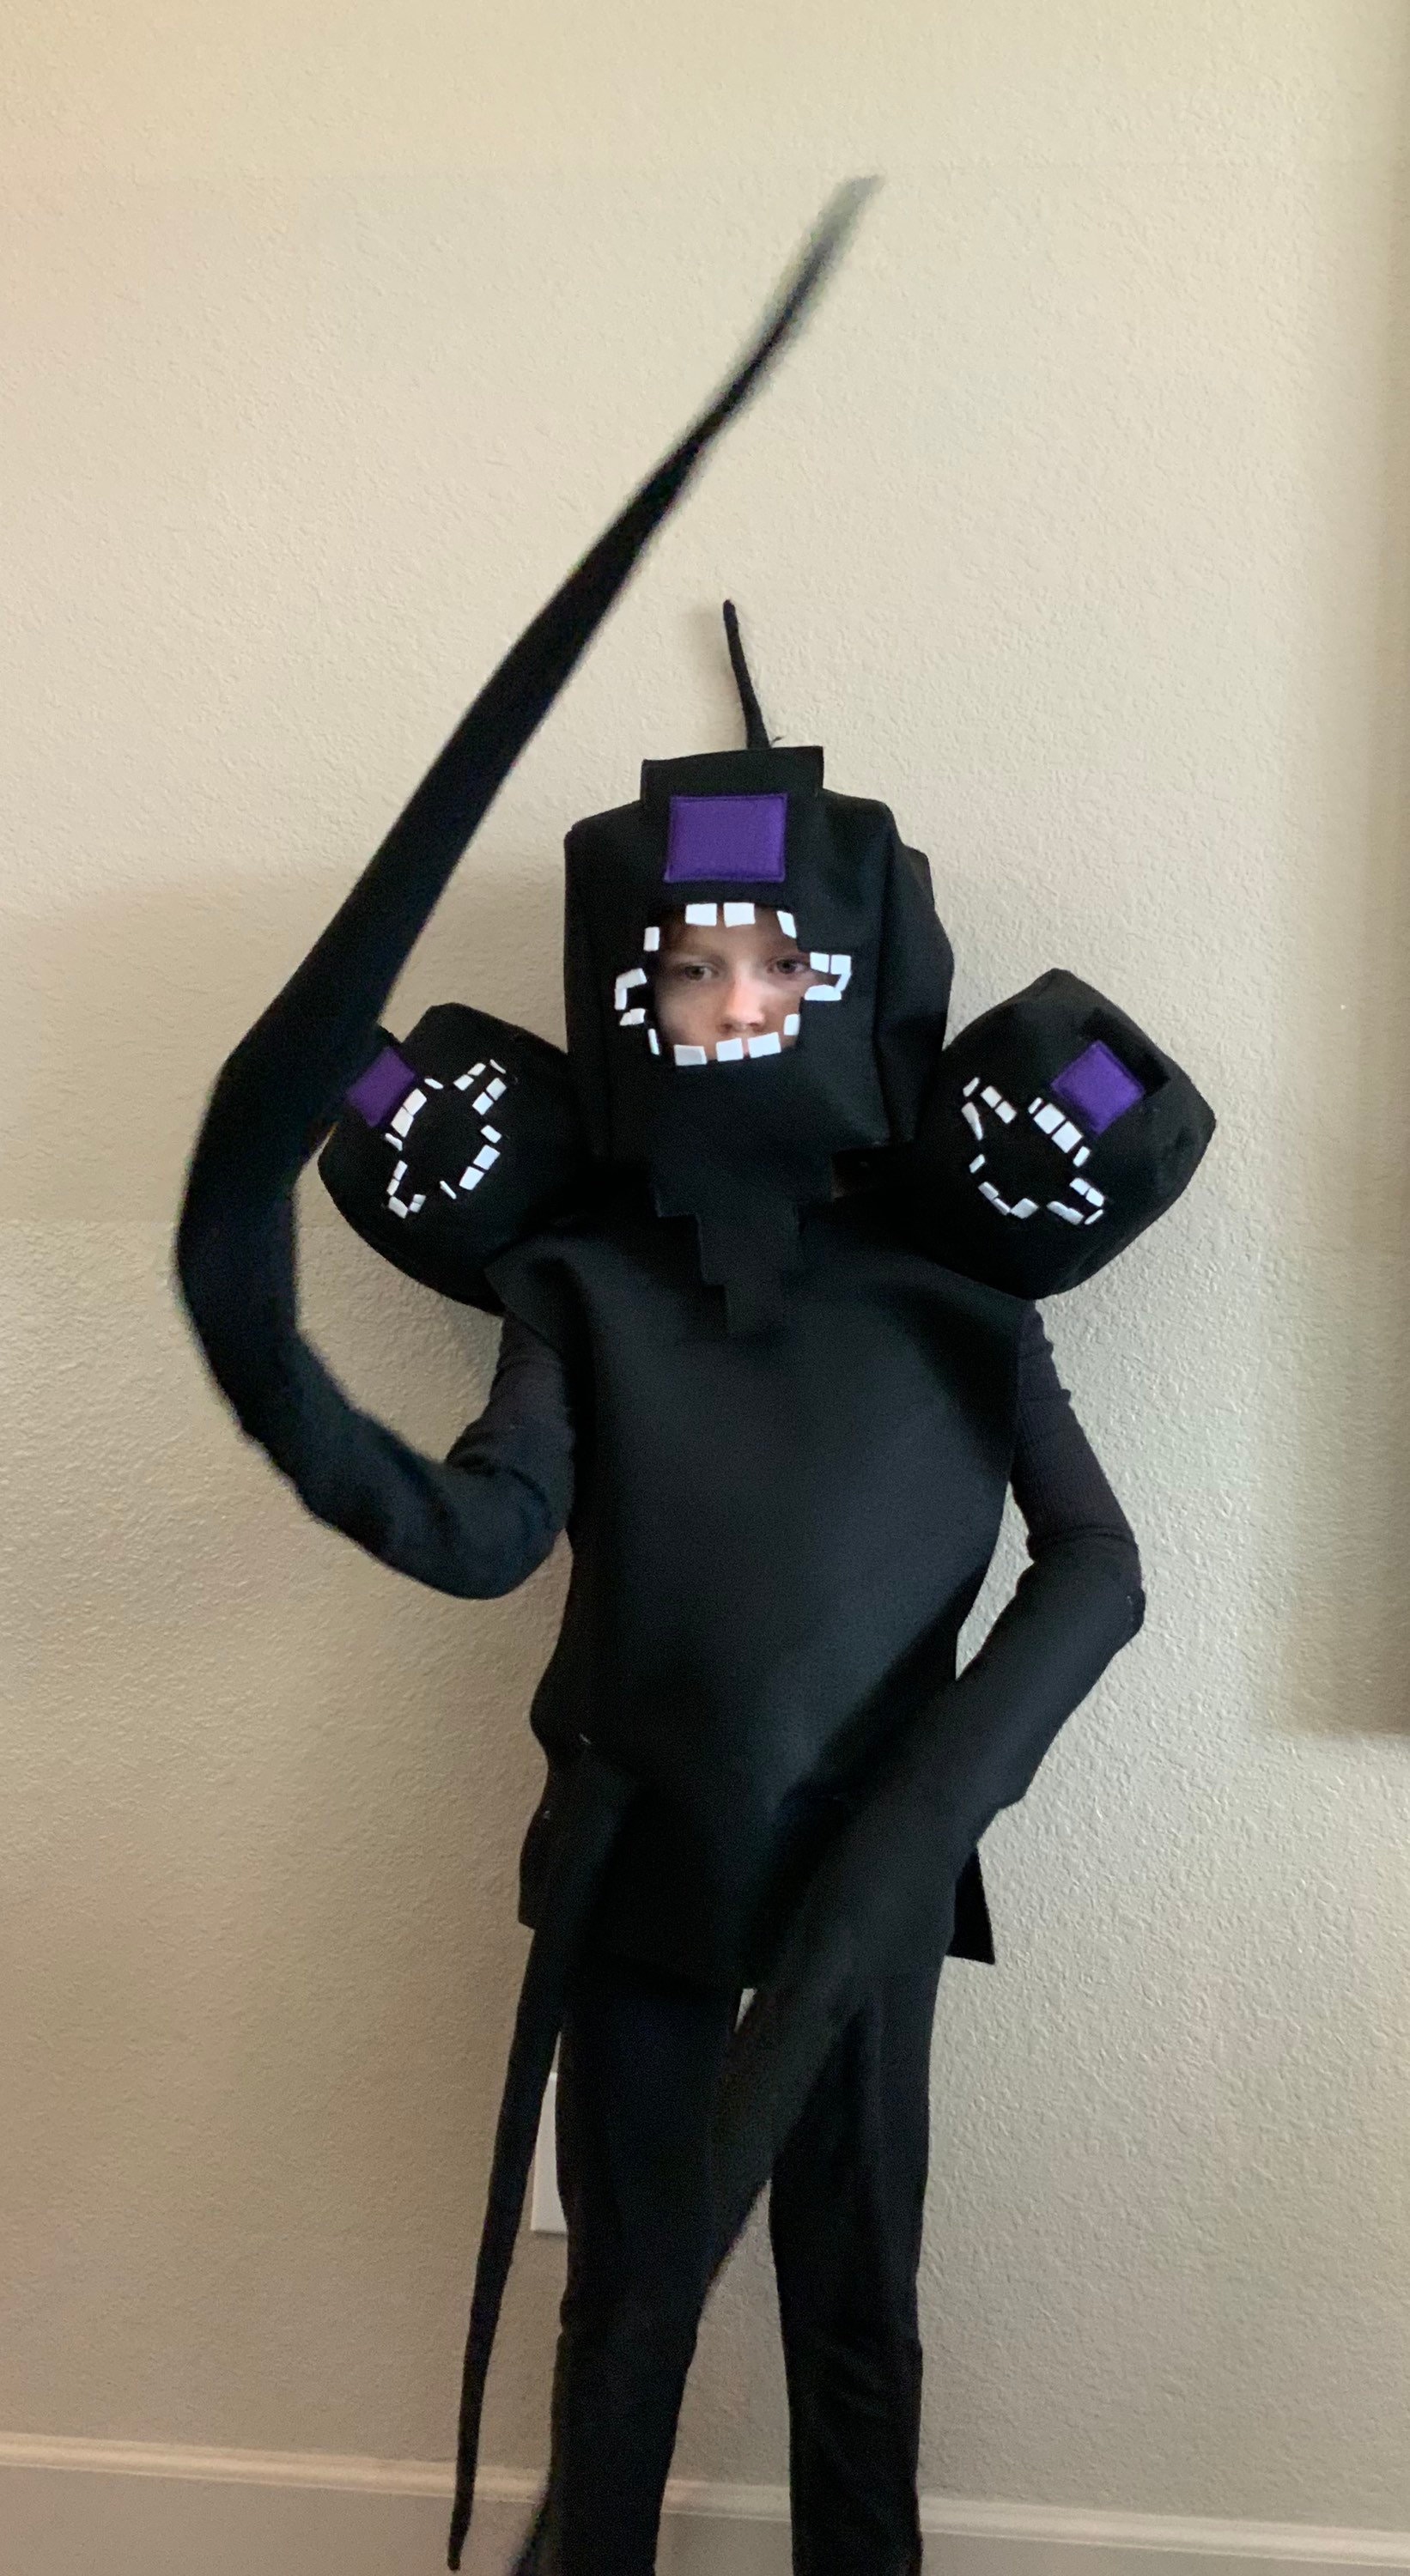 Minecraft Wither Storm Mod Costume lite Made to 